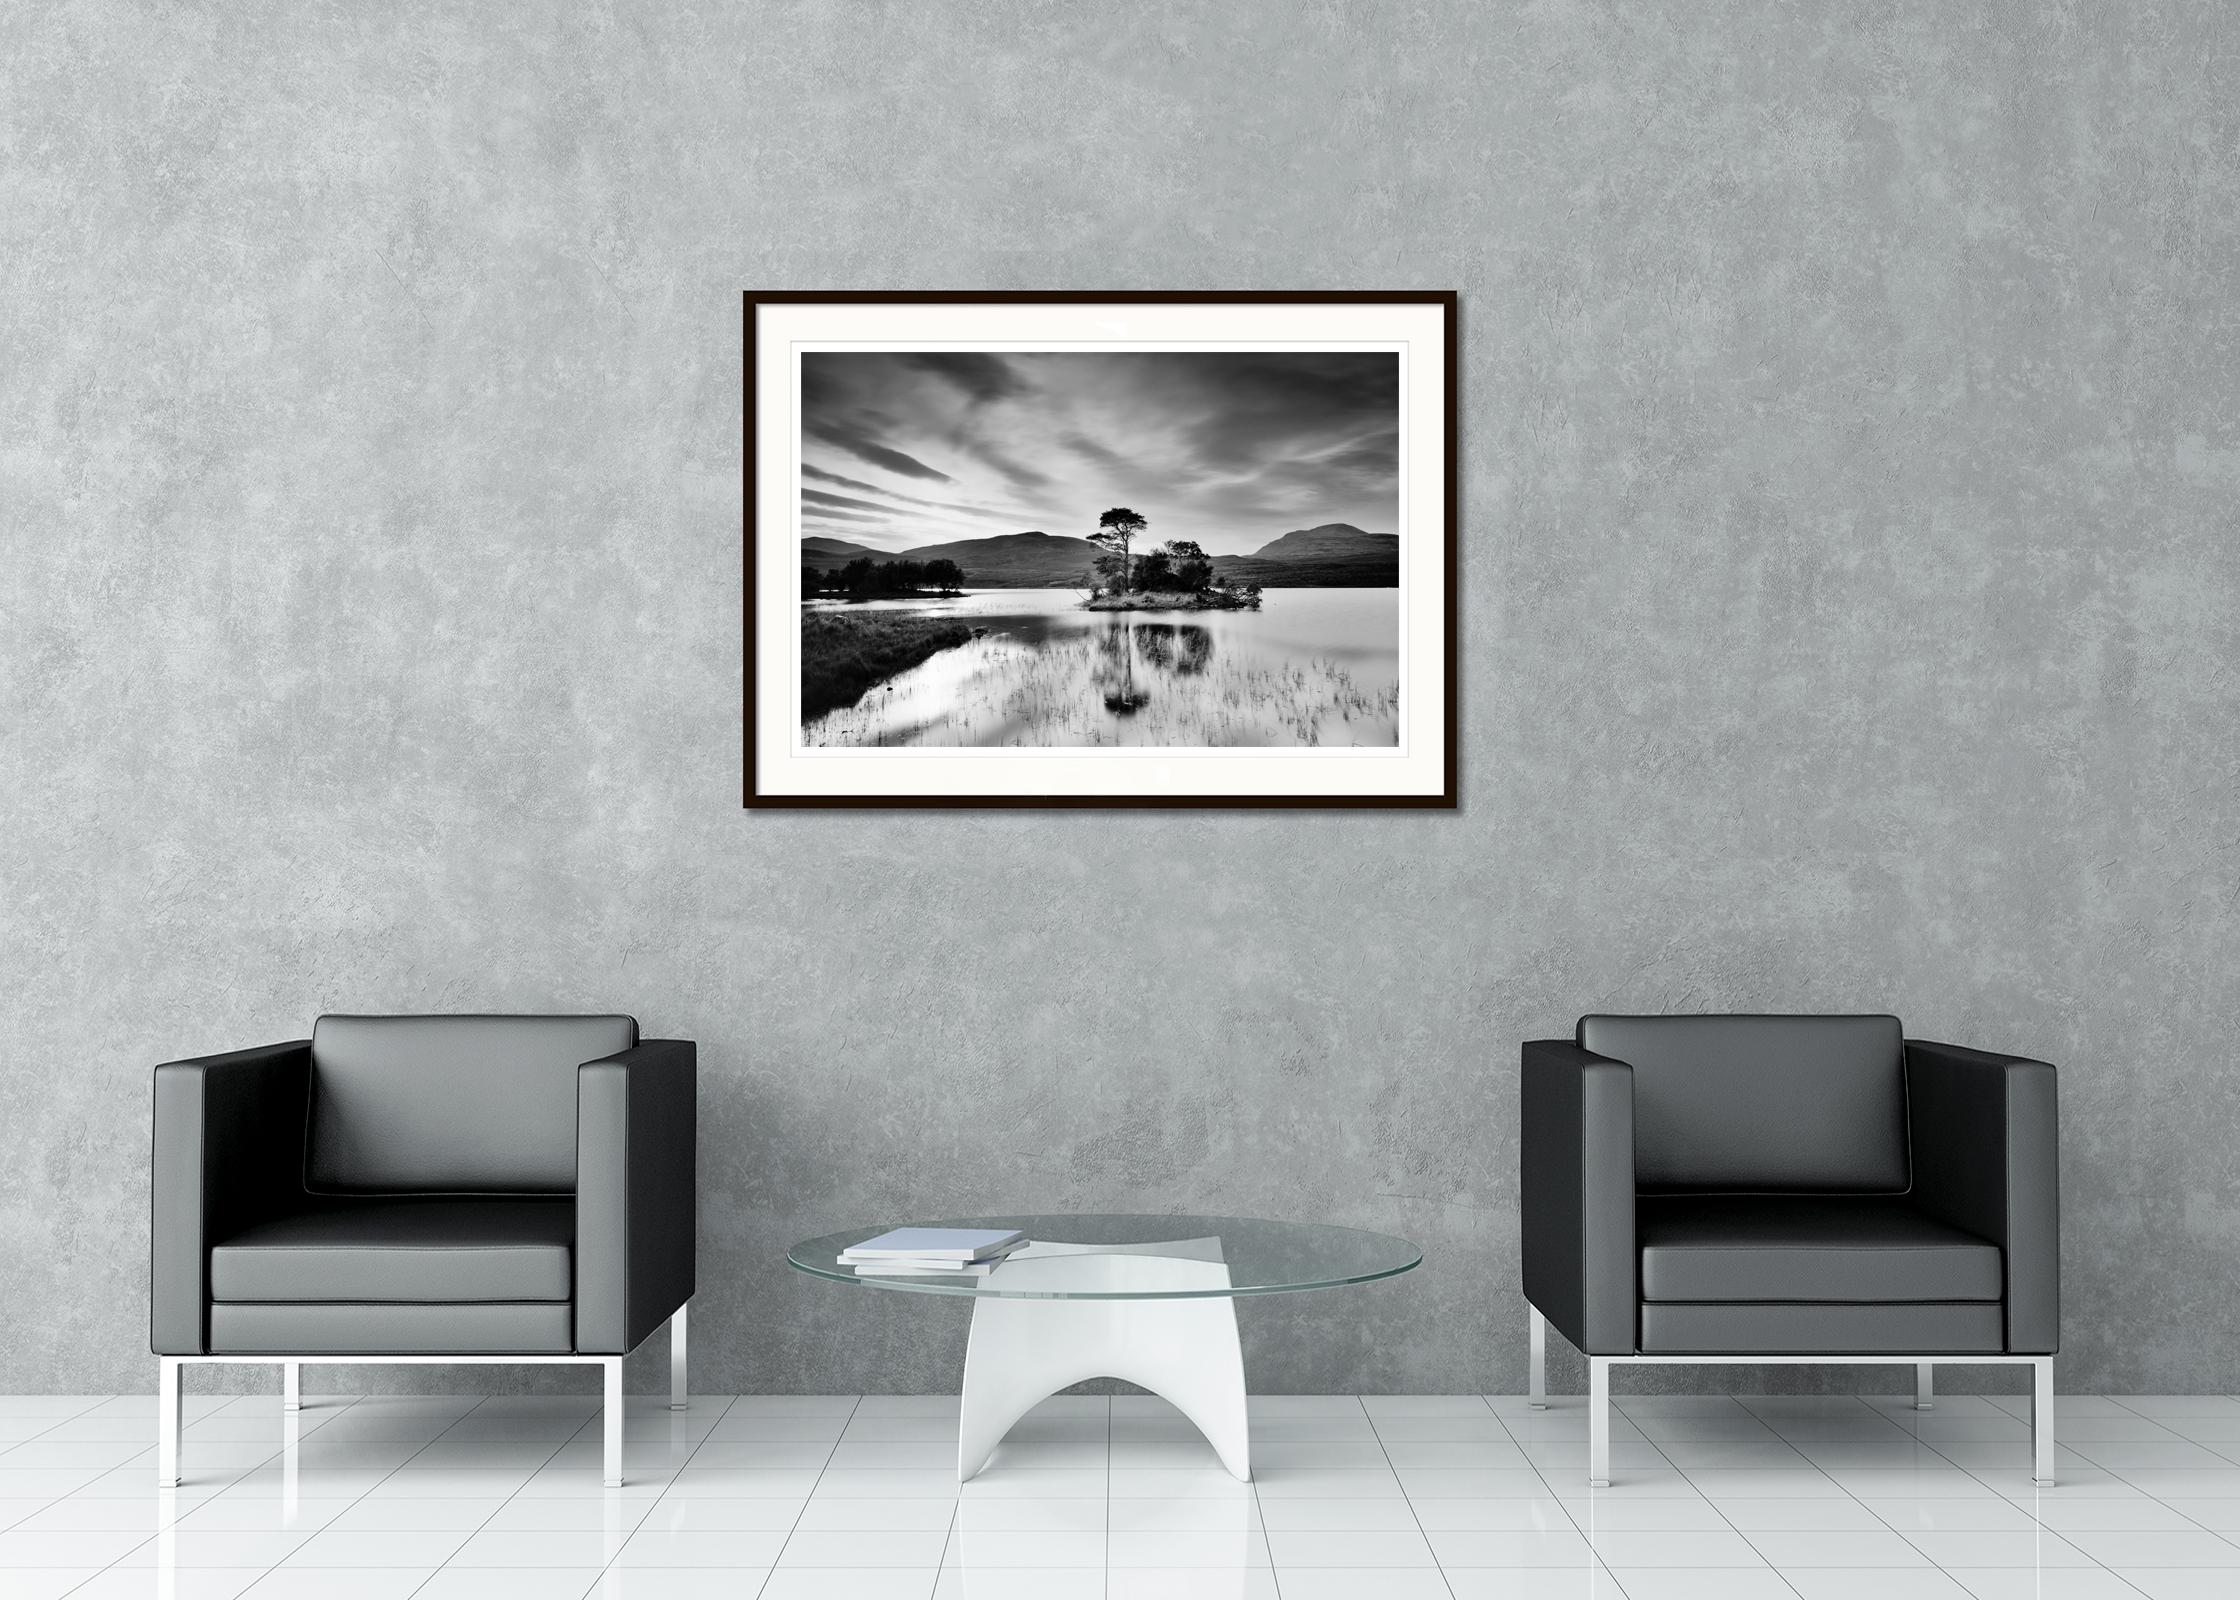 Black and White Fine Art landscape photography. Island with trees on a small mountain lake in the highlands of Scotland at sunset. Archival pigment ink print, edition of 9. Signed, titled, dated and numbered by artist. Certificate of authenticity